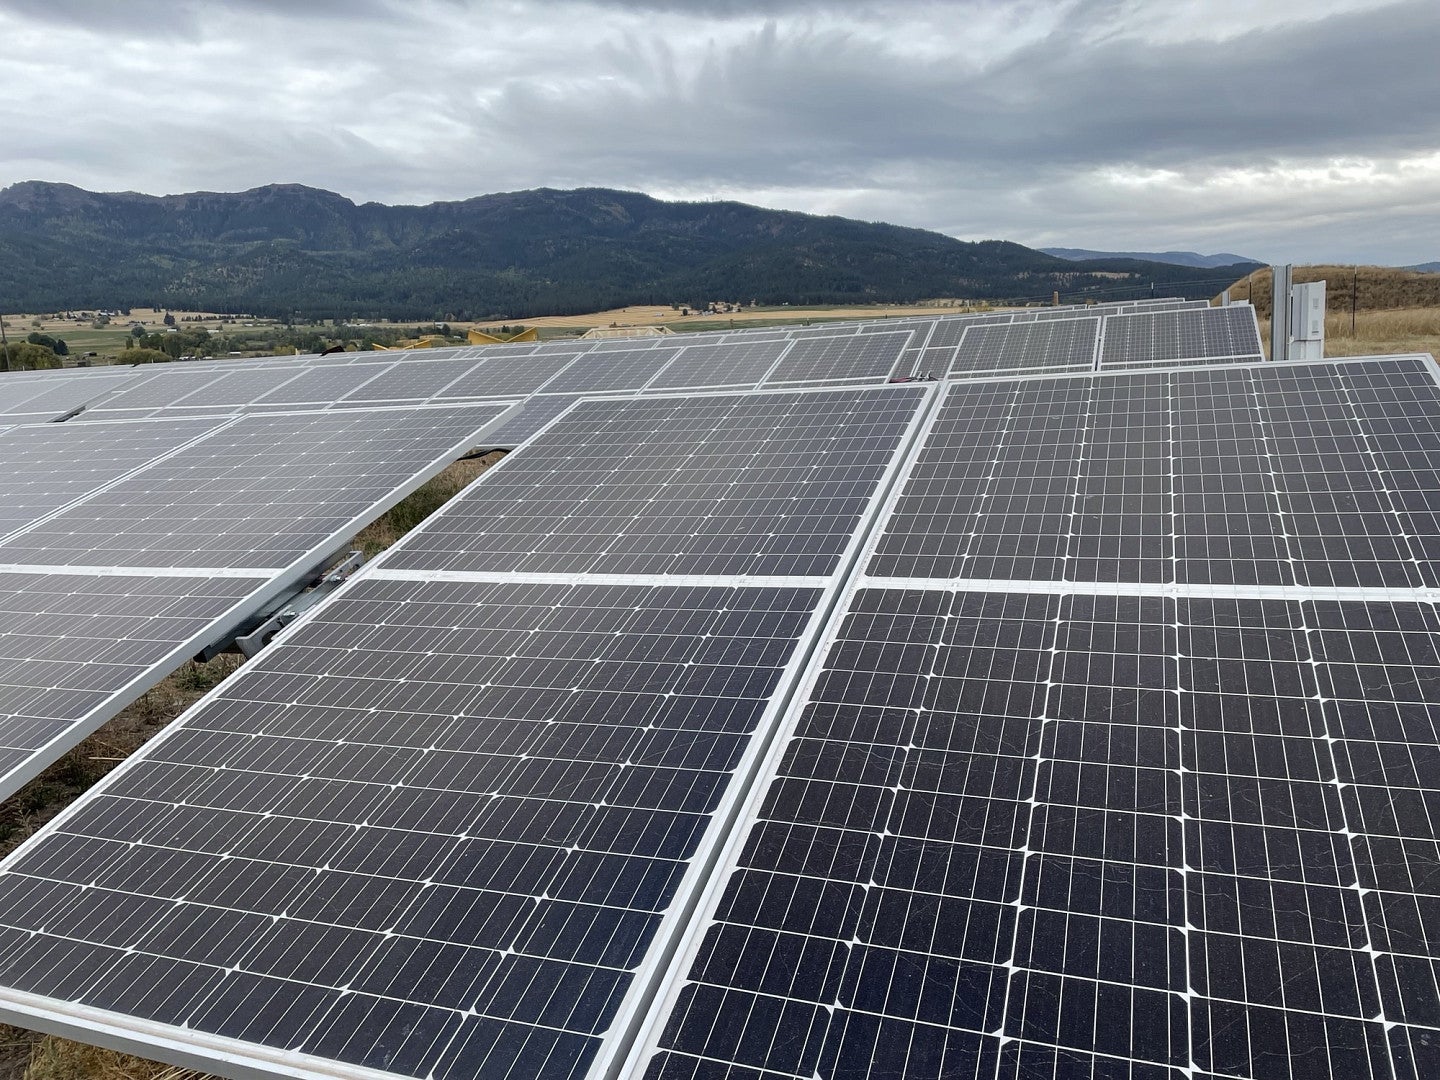 Photograph of solar panels in front of a landscape of hills